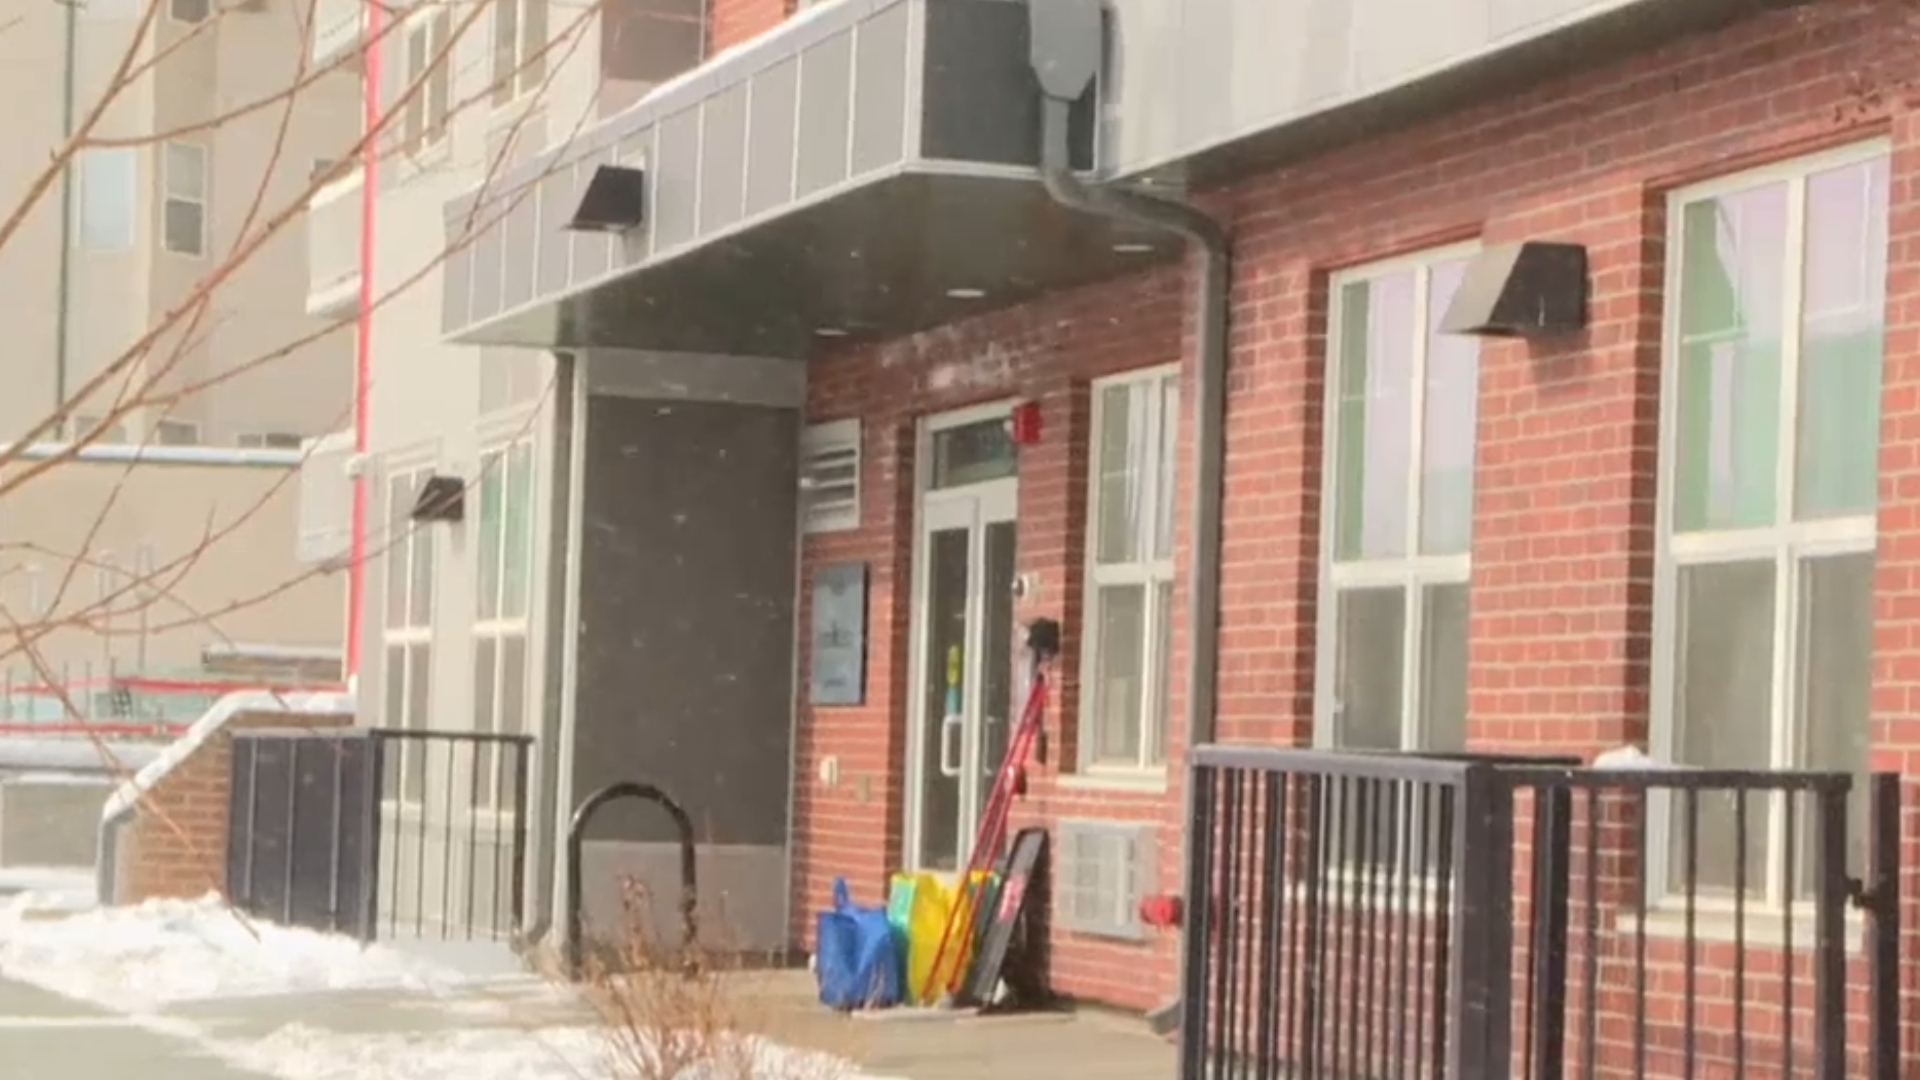 Affordable and transitional youth housing expansion in Calgary